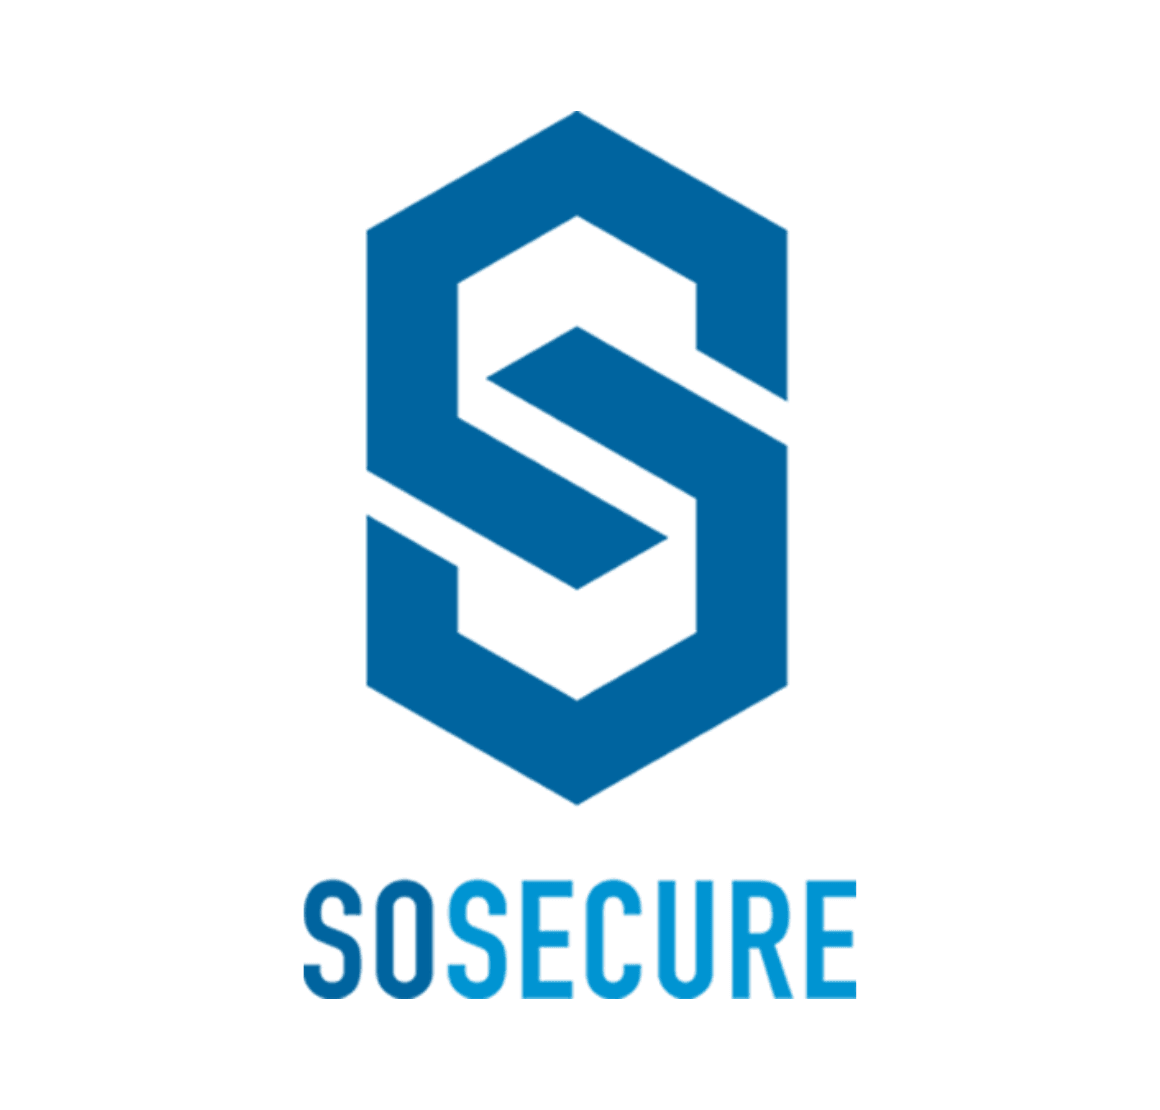 Sosecure-logo-it-review